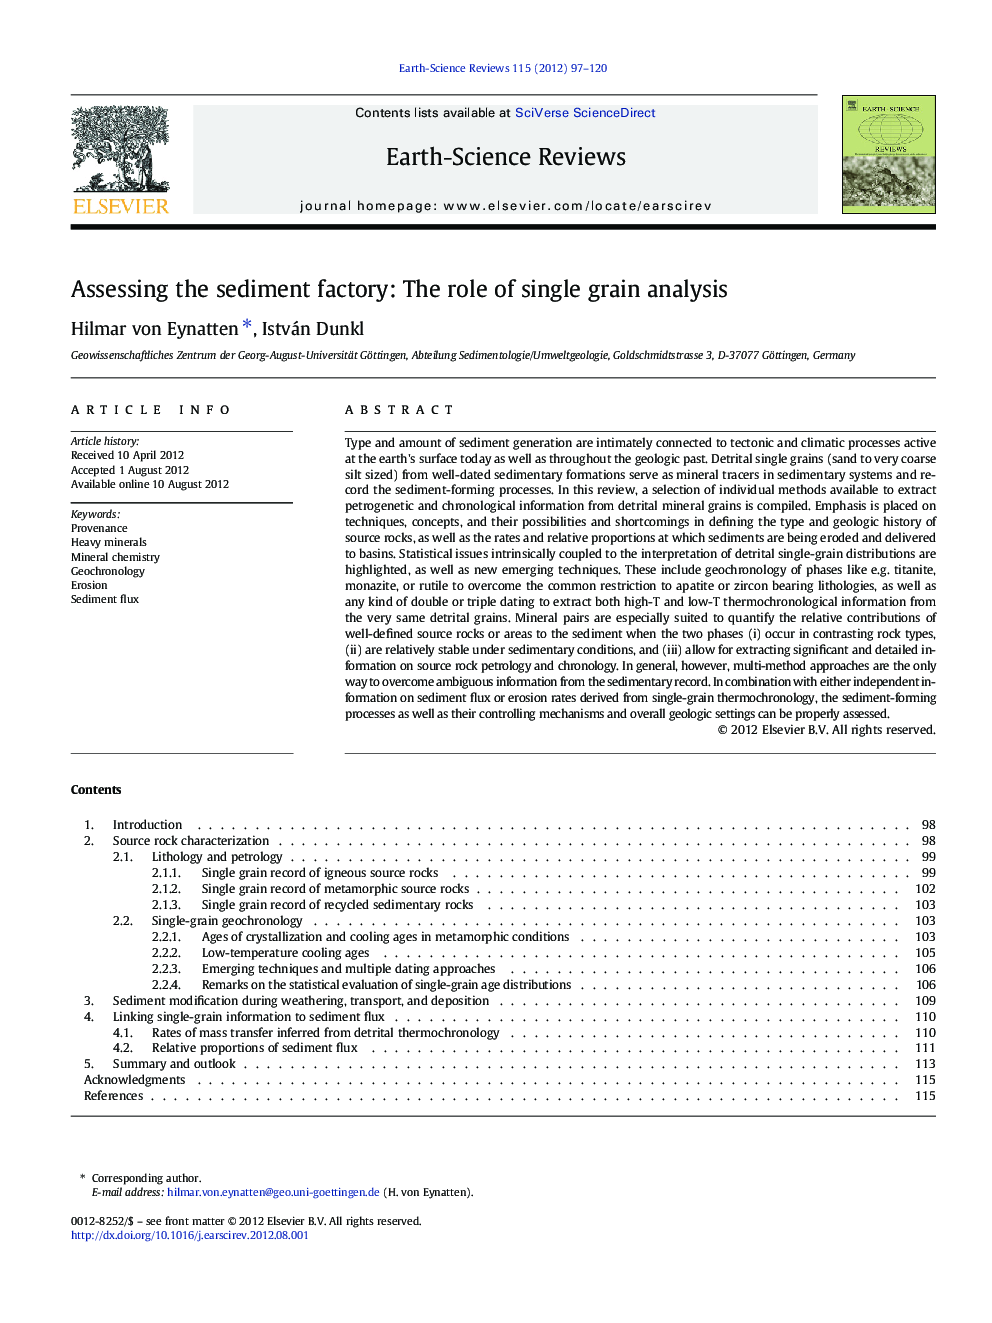 Assessing the sediment factory: The role of single grain analysis